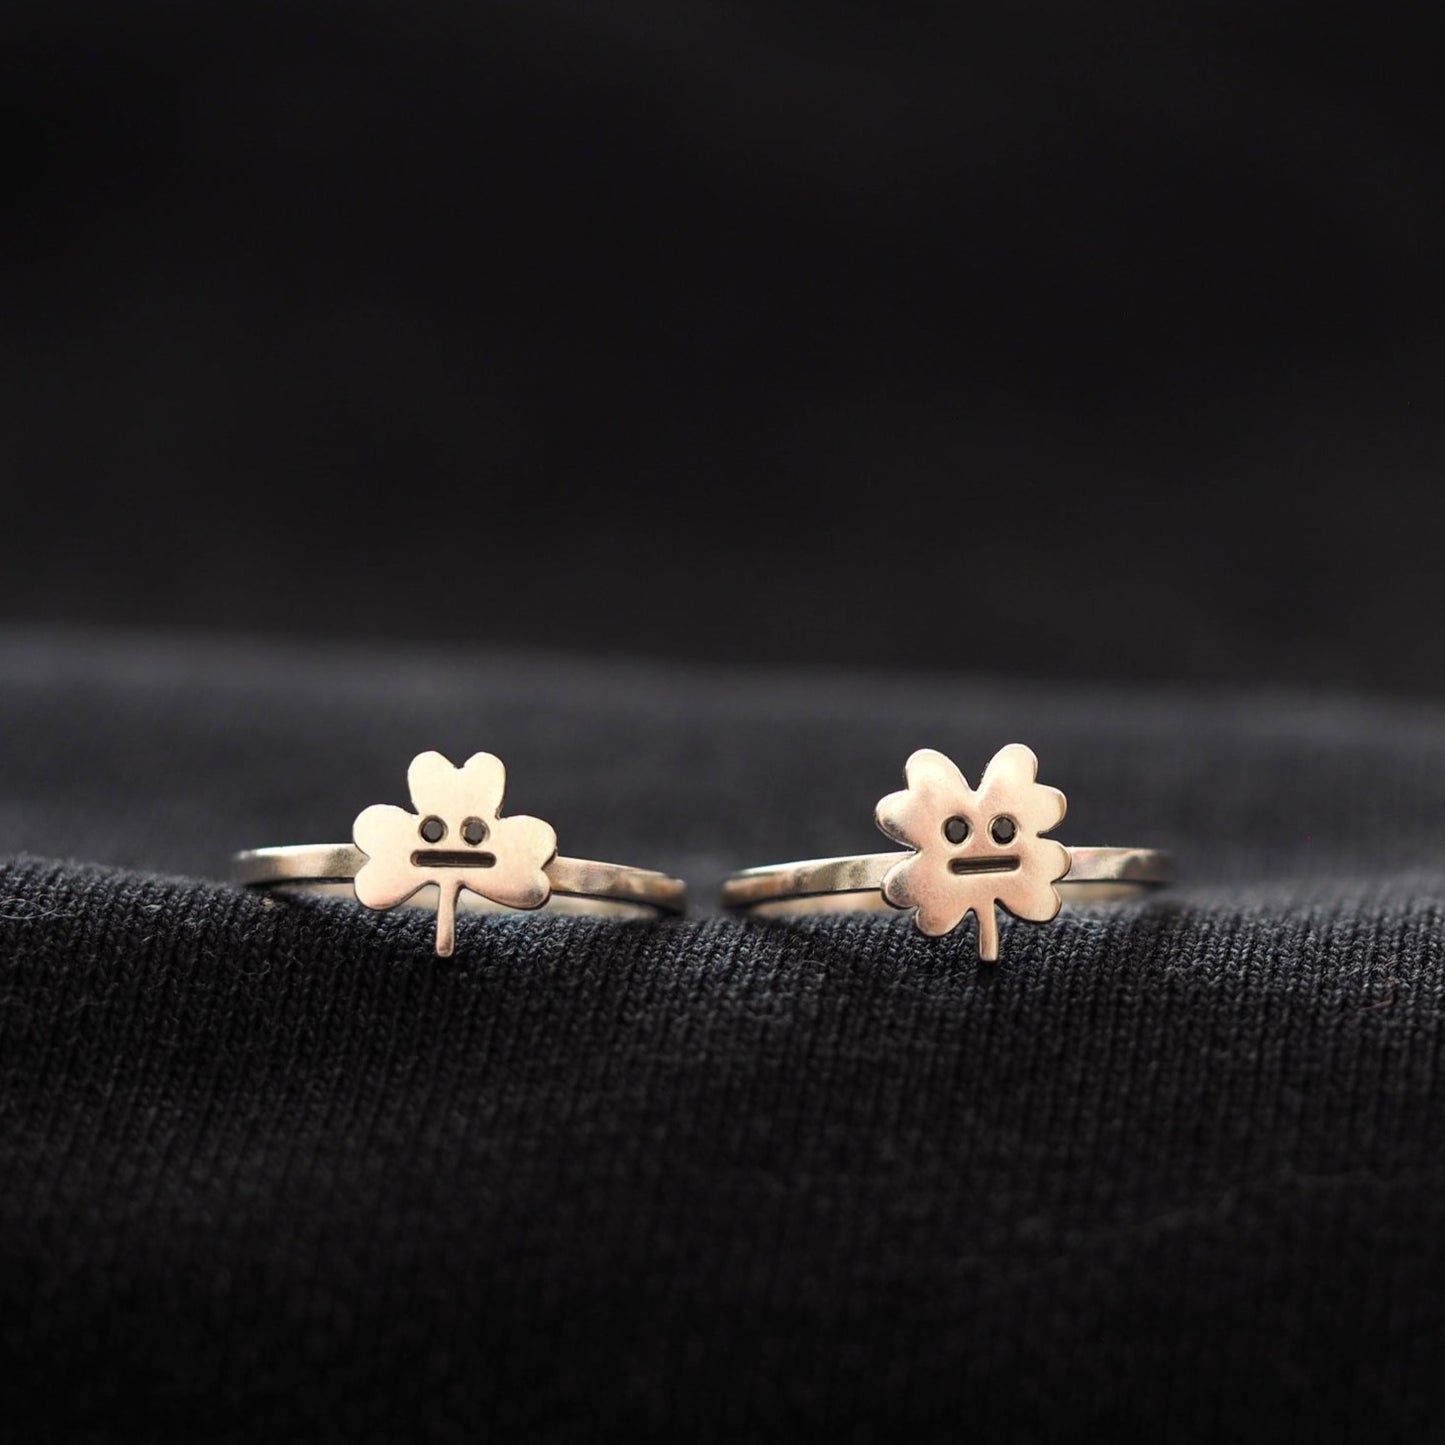 Clover Rings - Recycled Sterling Silver